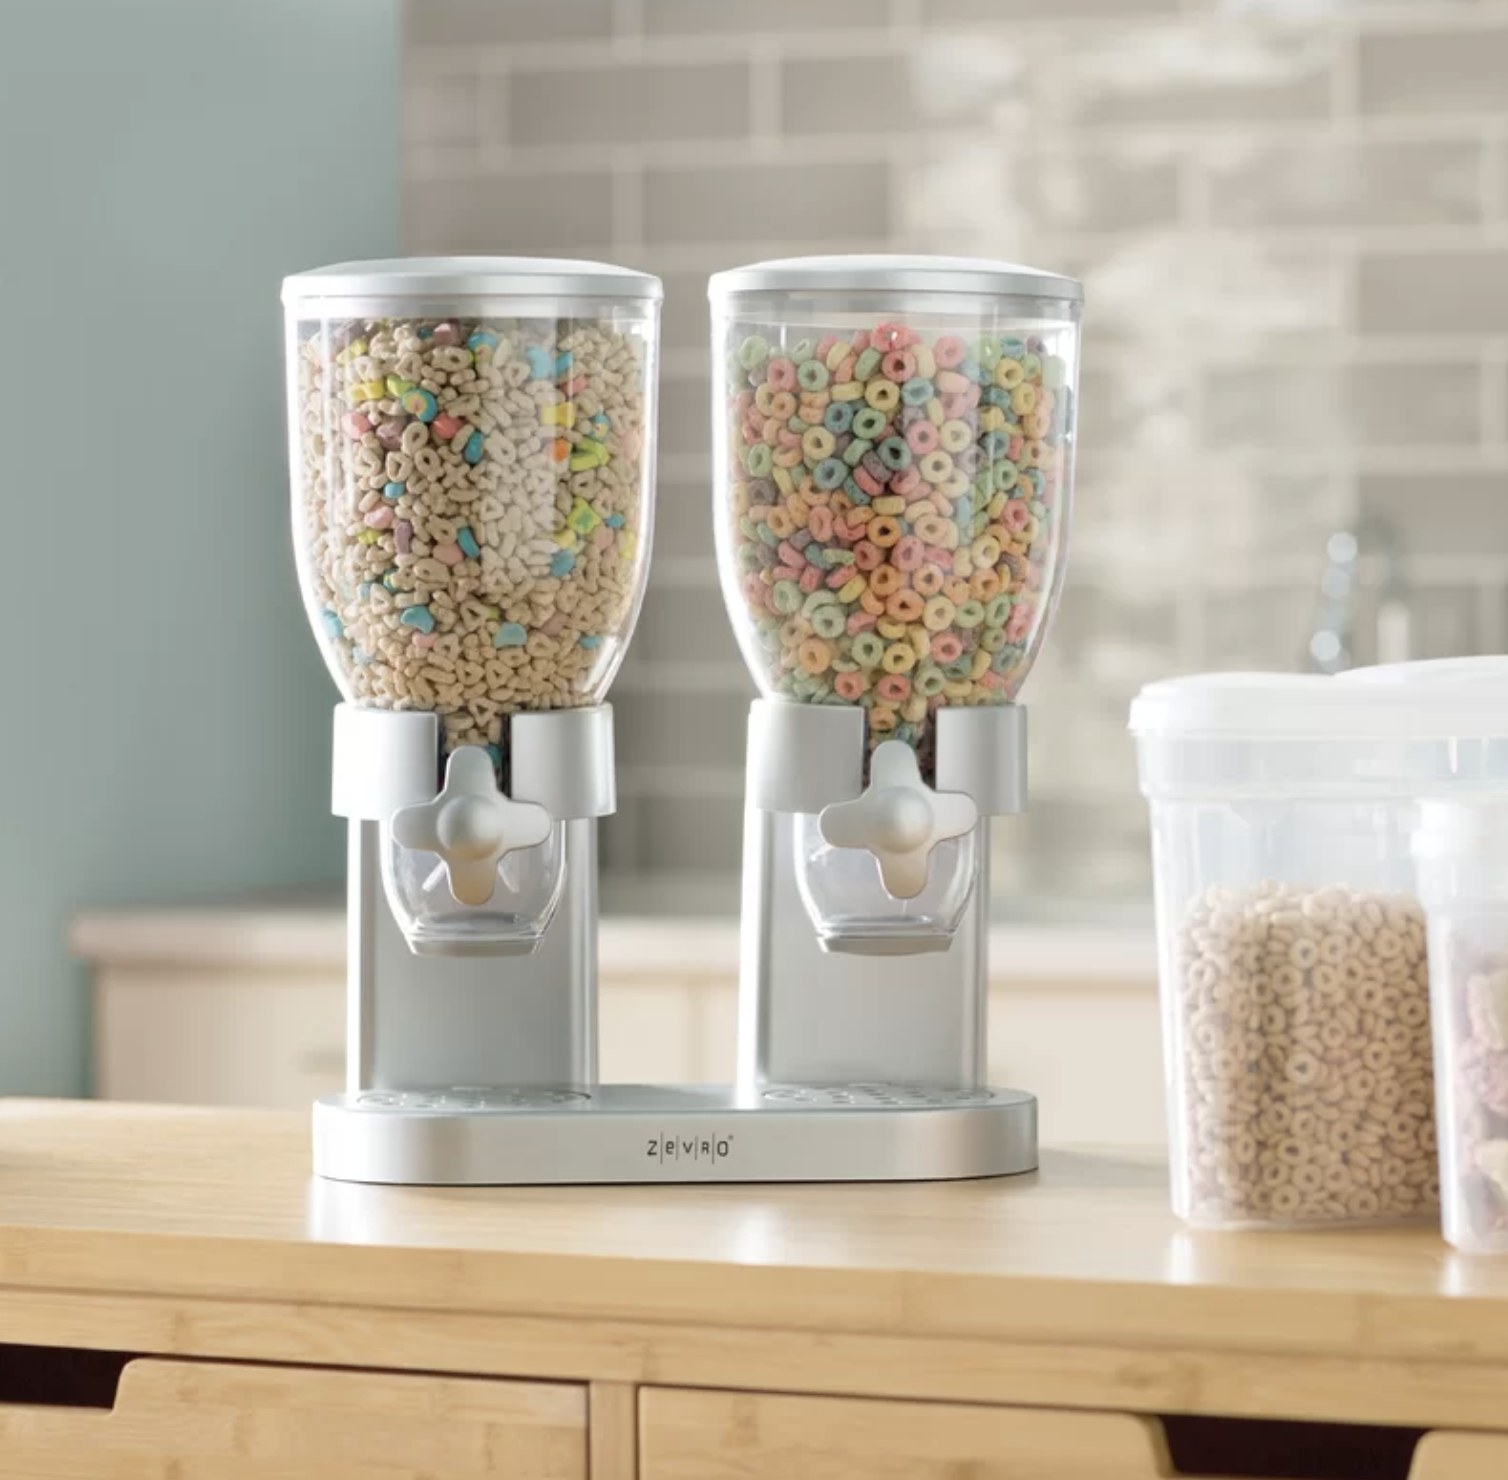 The double cereal dispenser